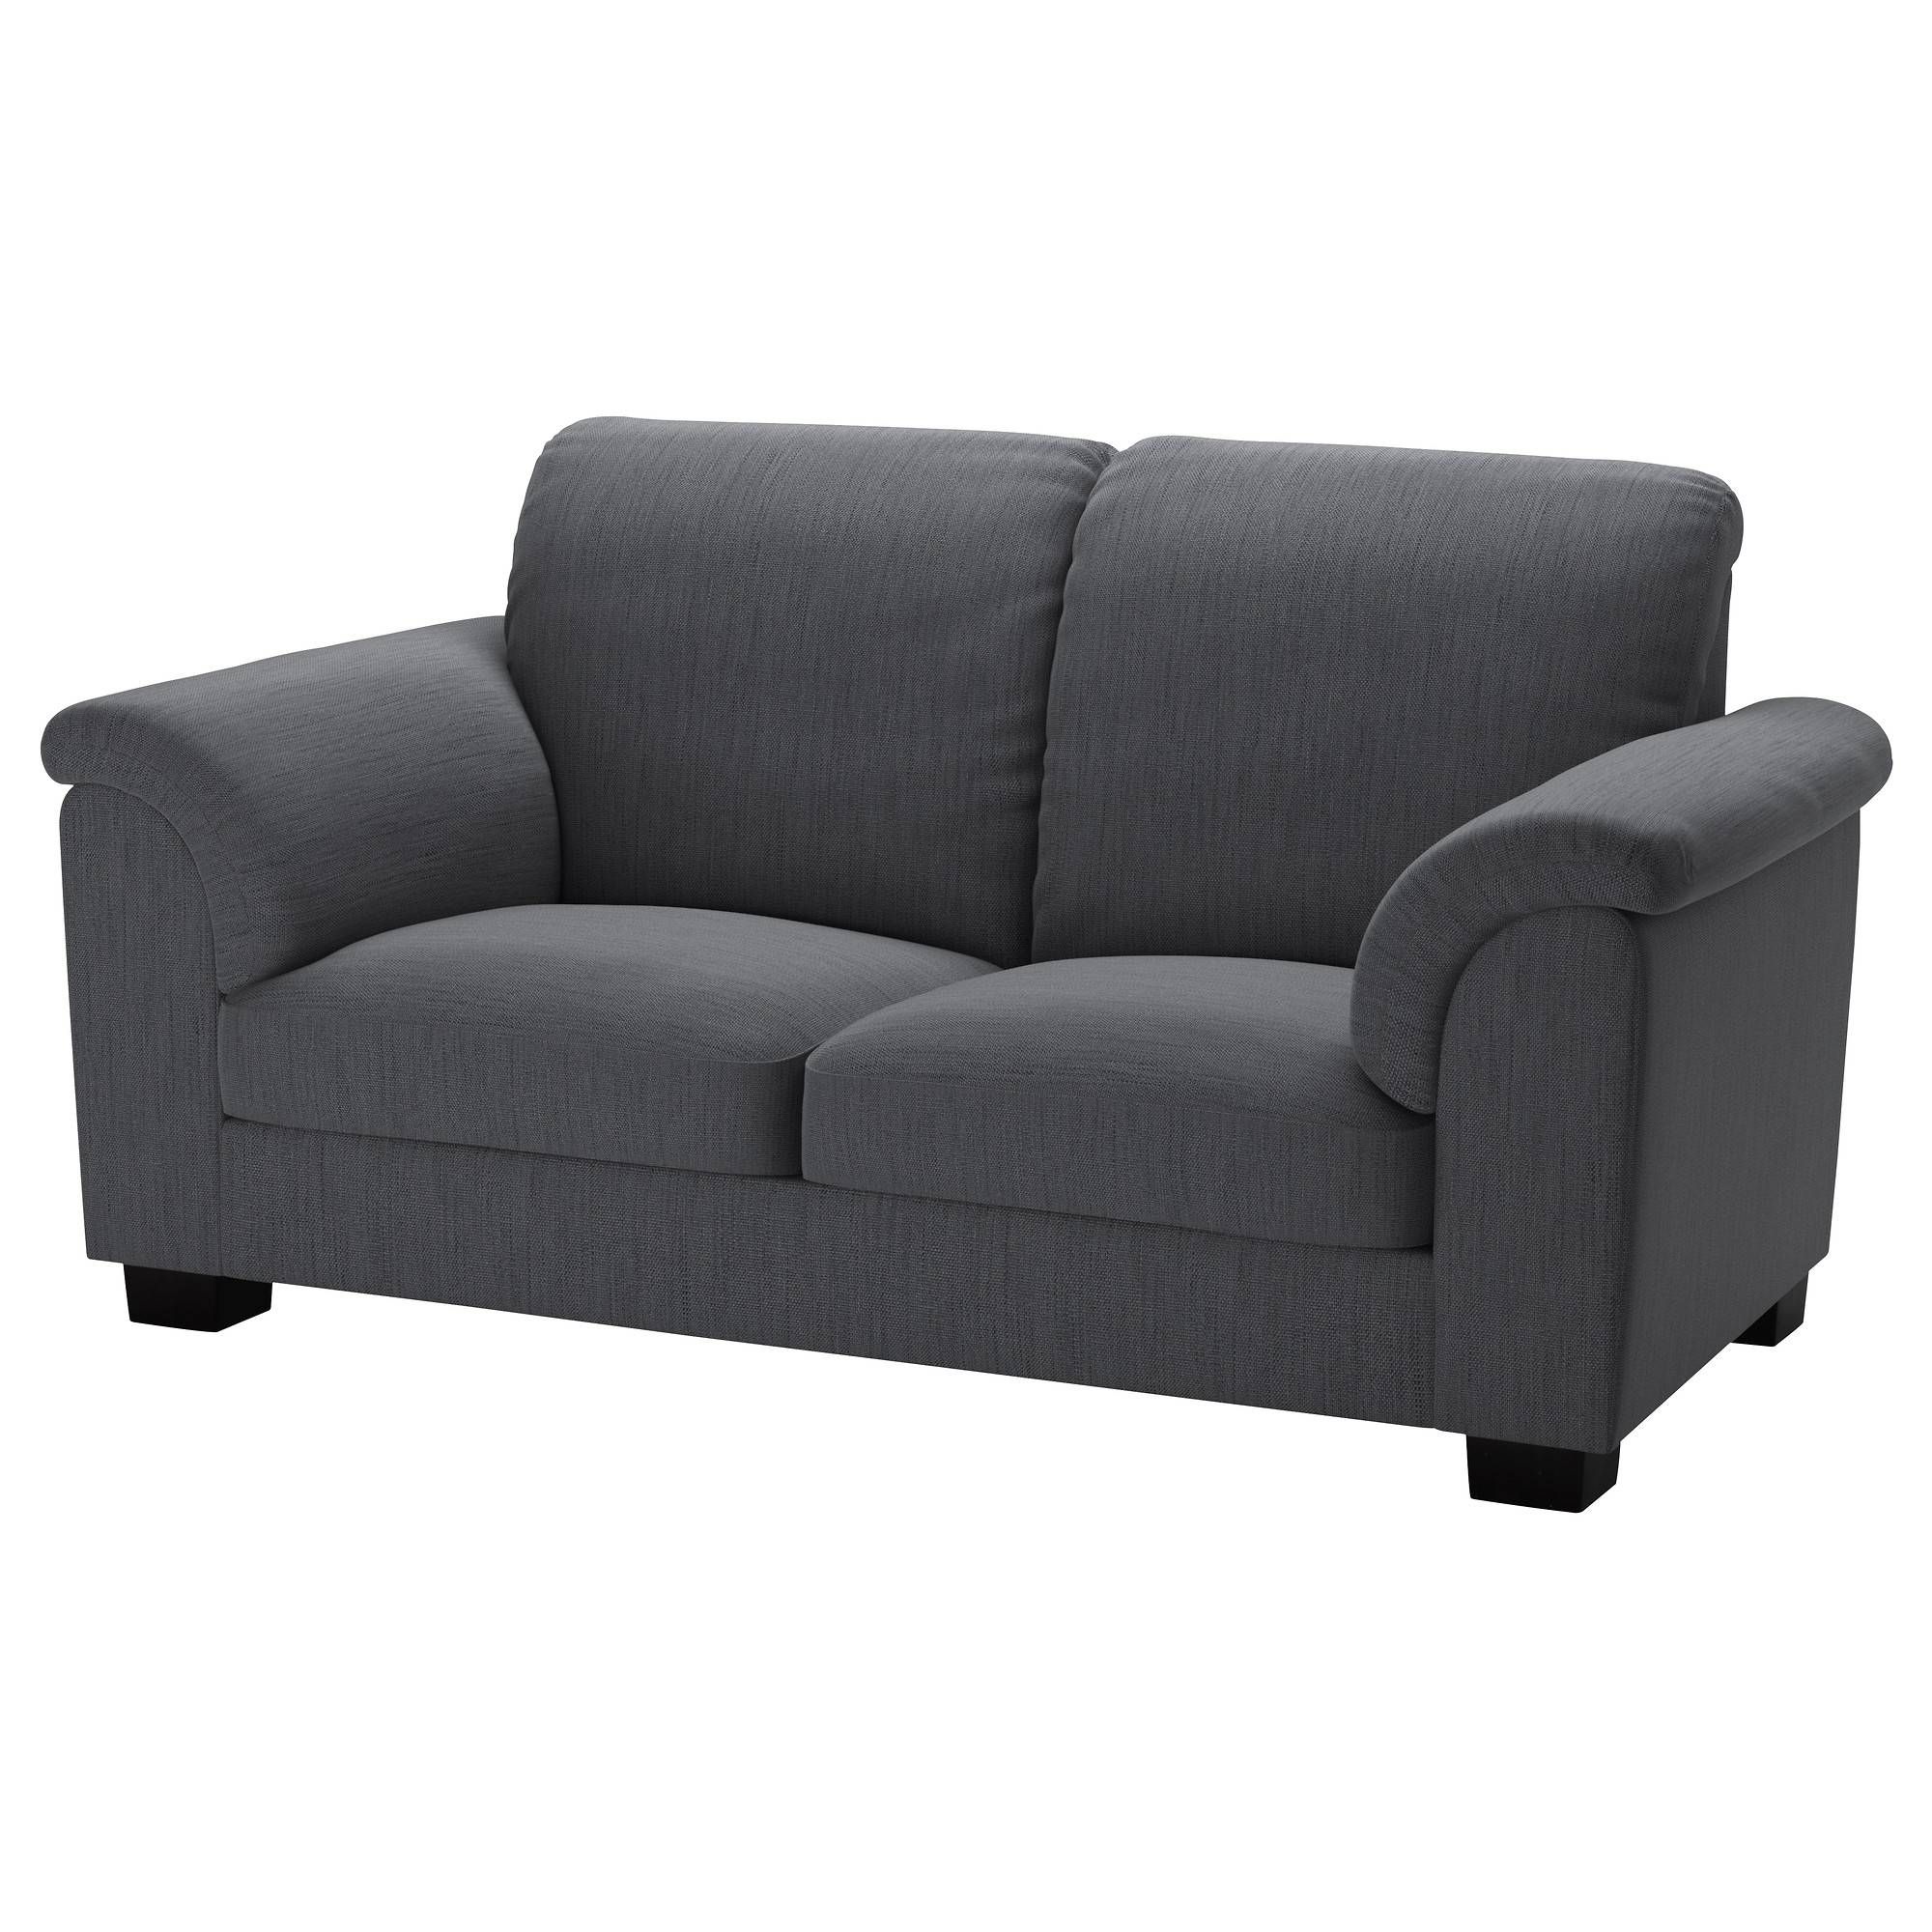 Sofas | Ikea Ireland – Dublin Intended For Sofas With High Backs (View 3 of 30)